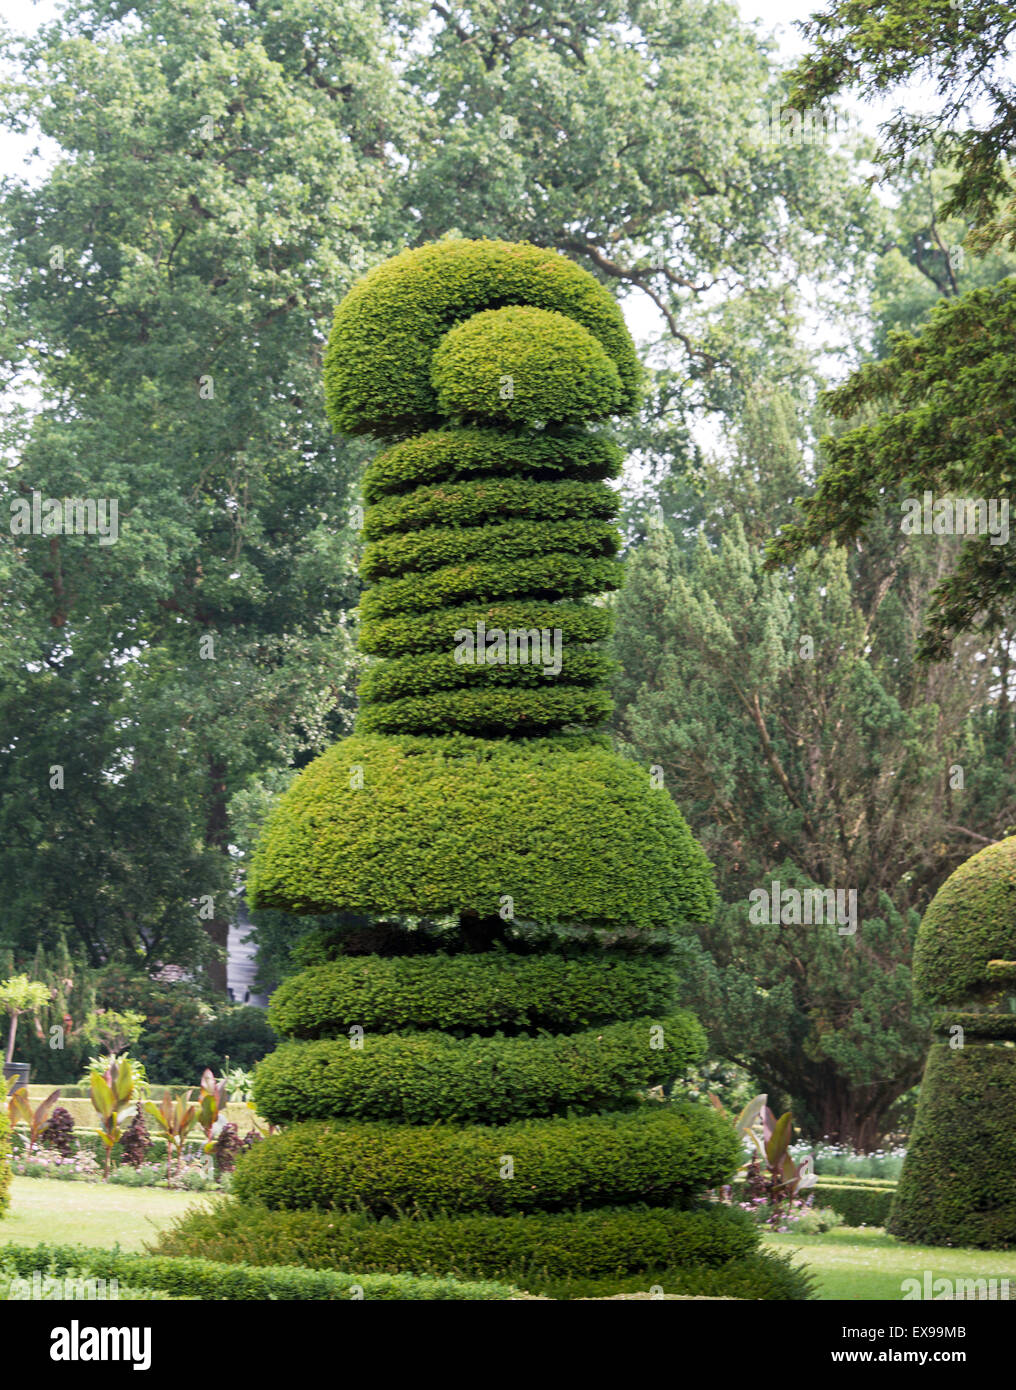 very big pruned buxus tree in special form Stock Photo